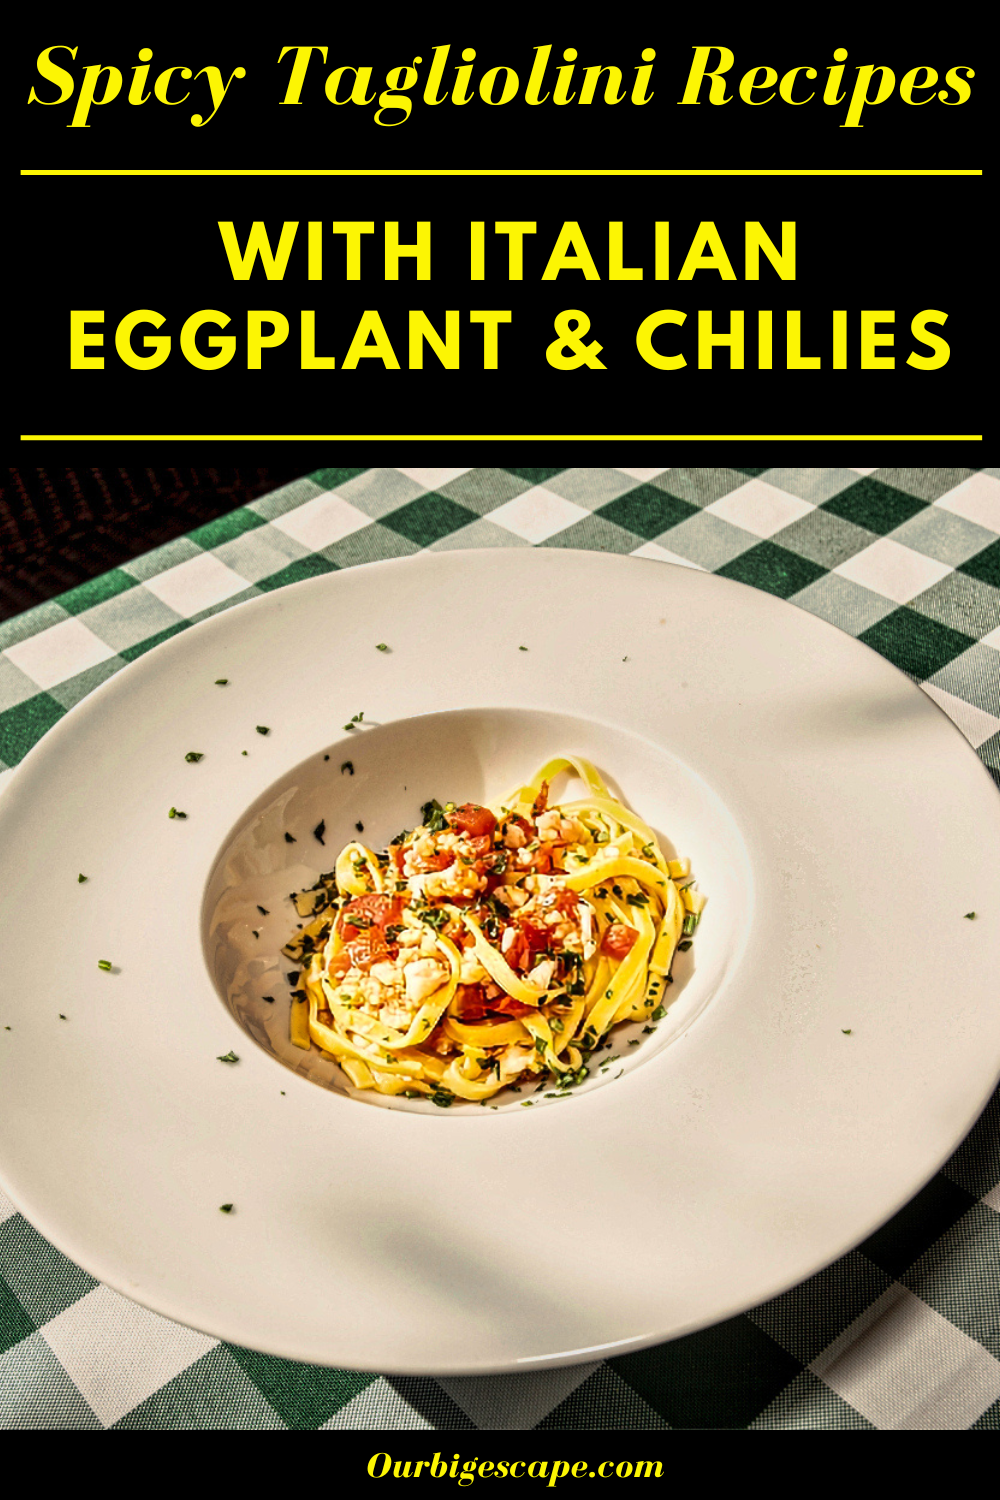 Spicy Tagliolini Recipes with Italian Eggplant and Chilies